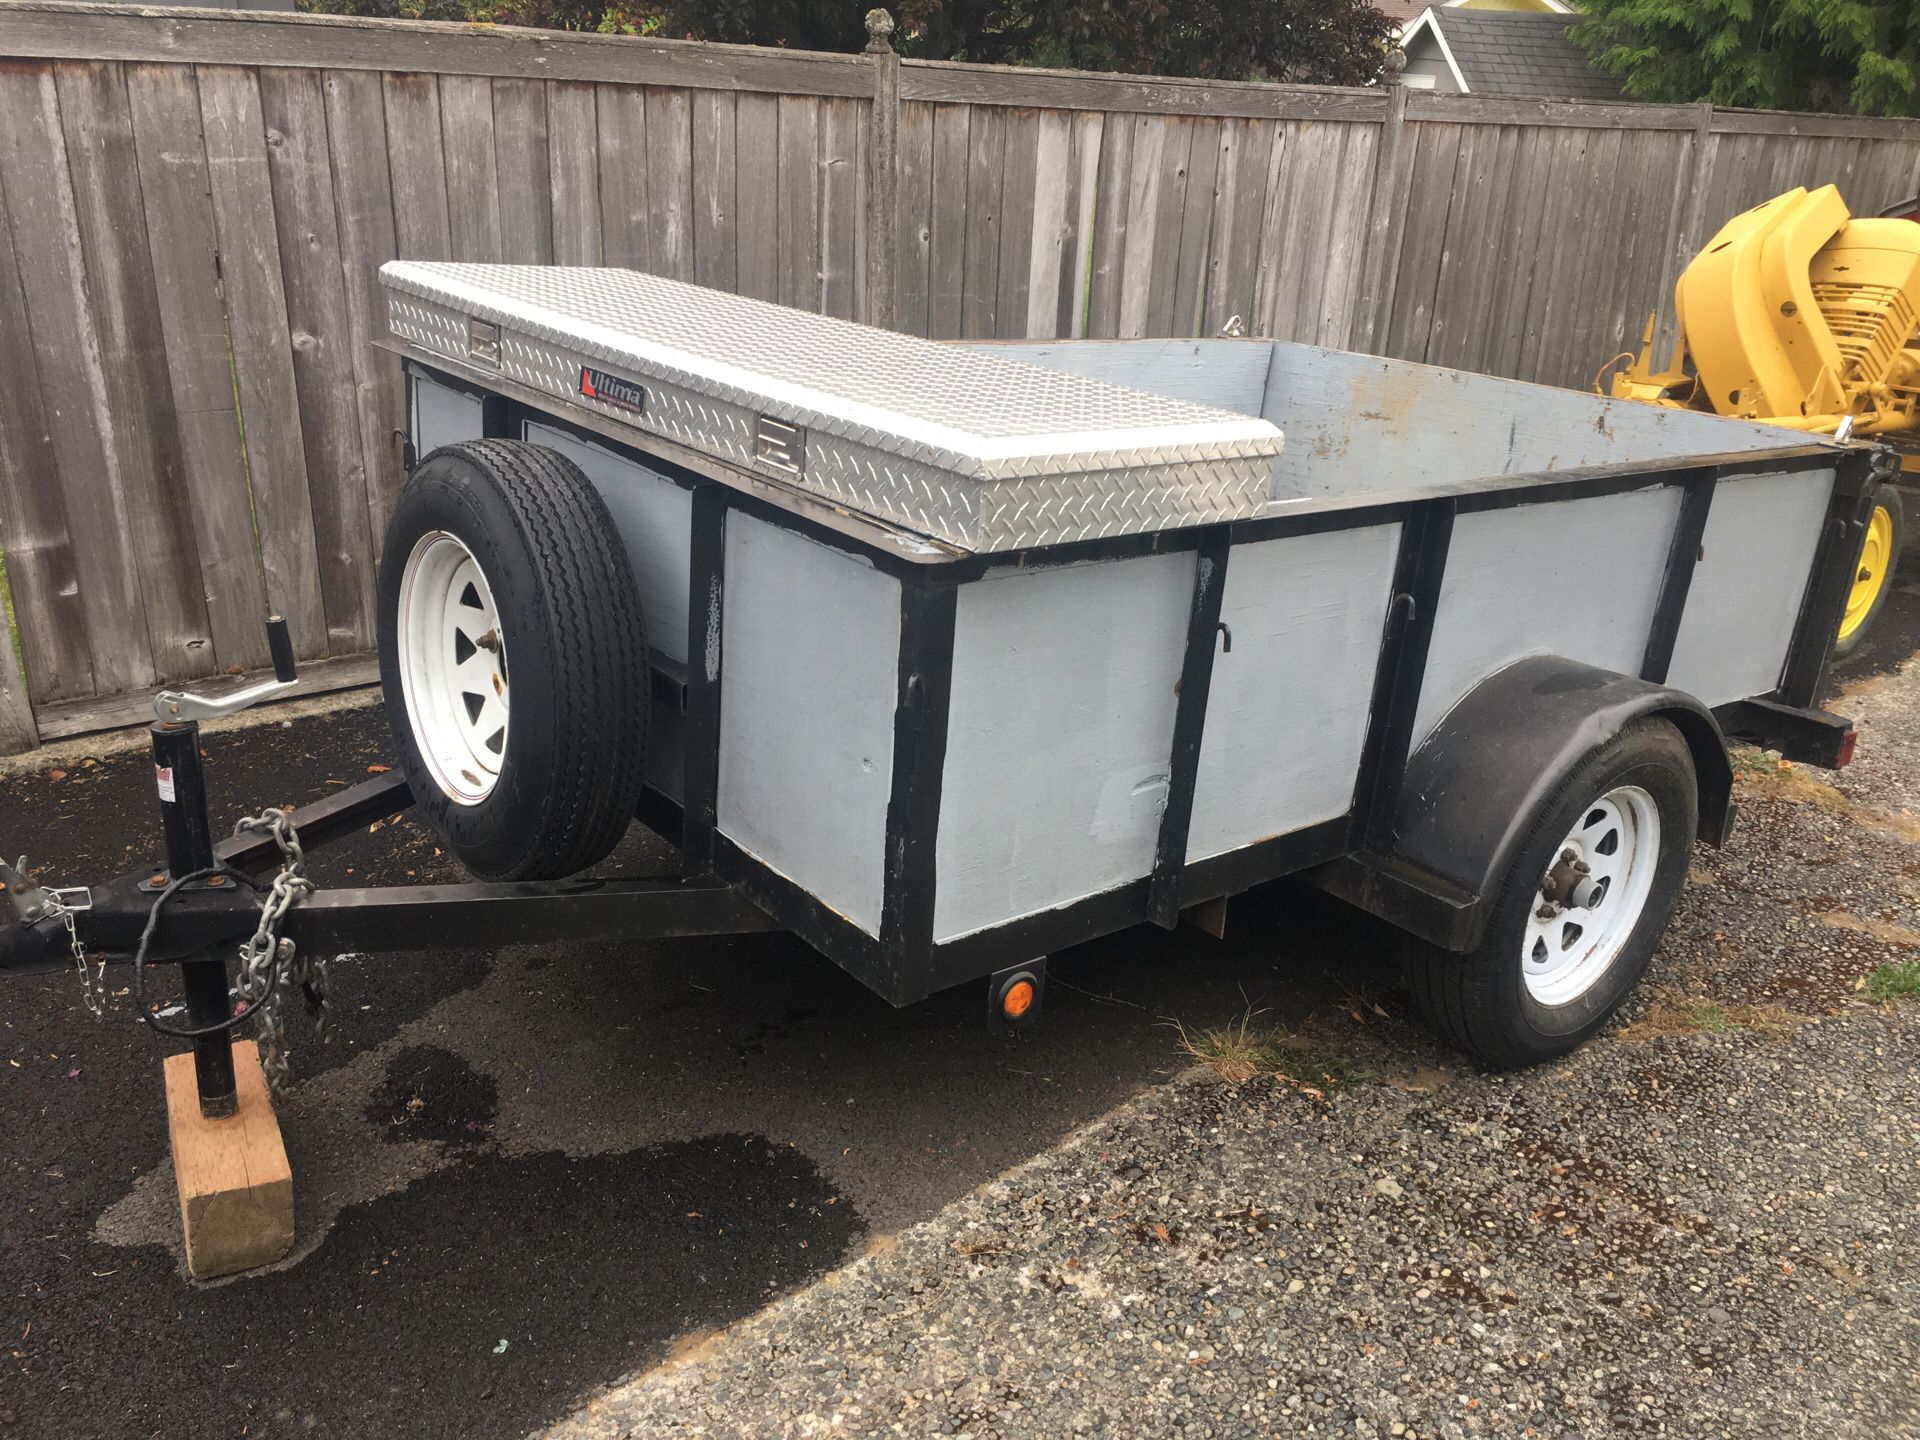 Utility trailer 8x5. New tires, spare tire, and truck box included